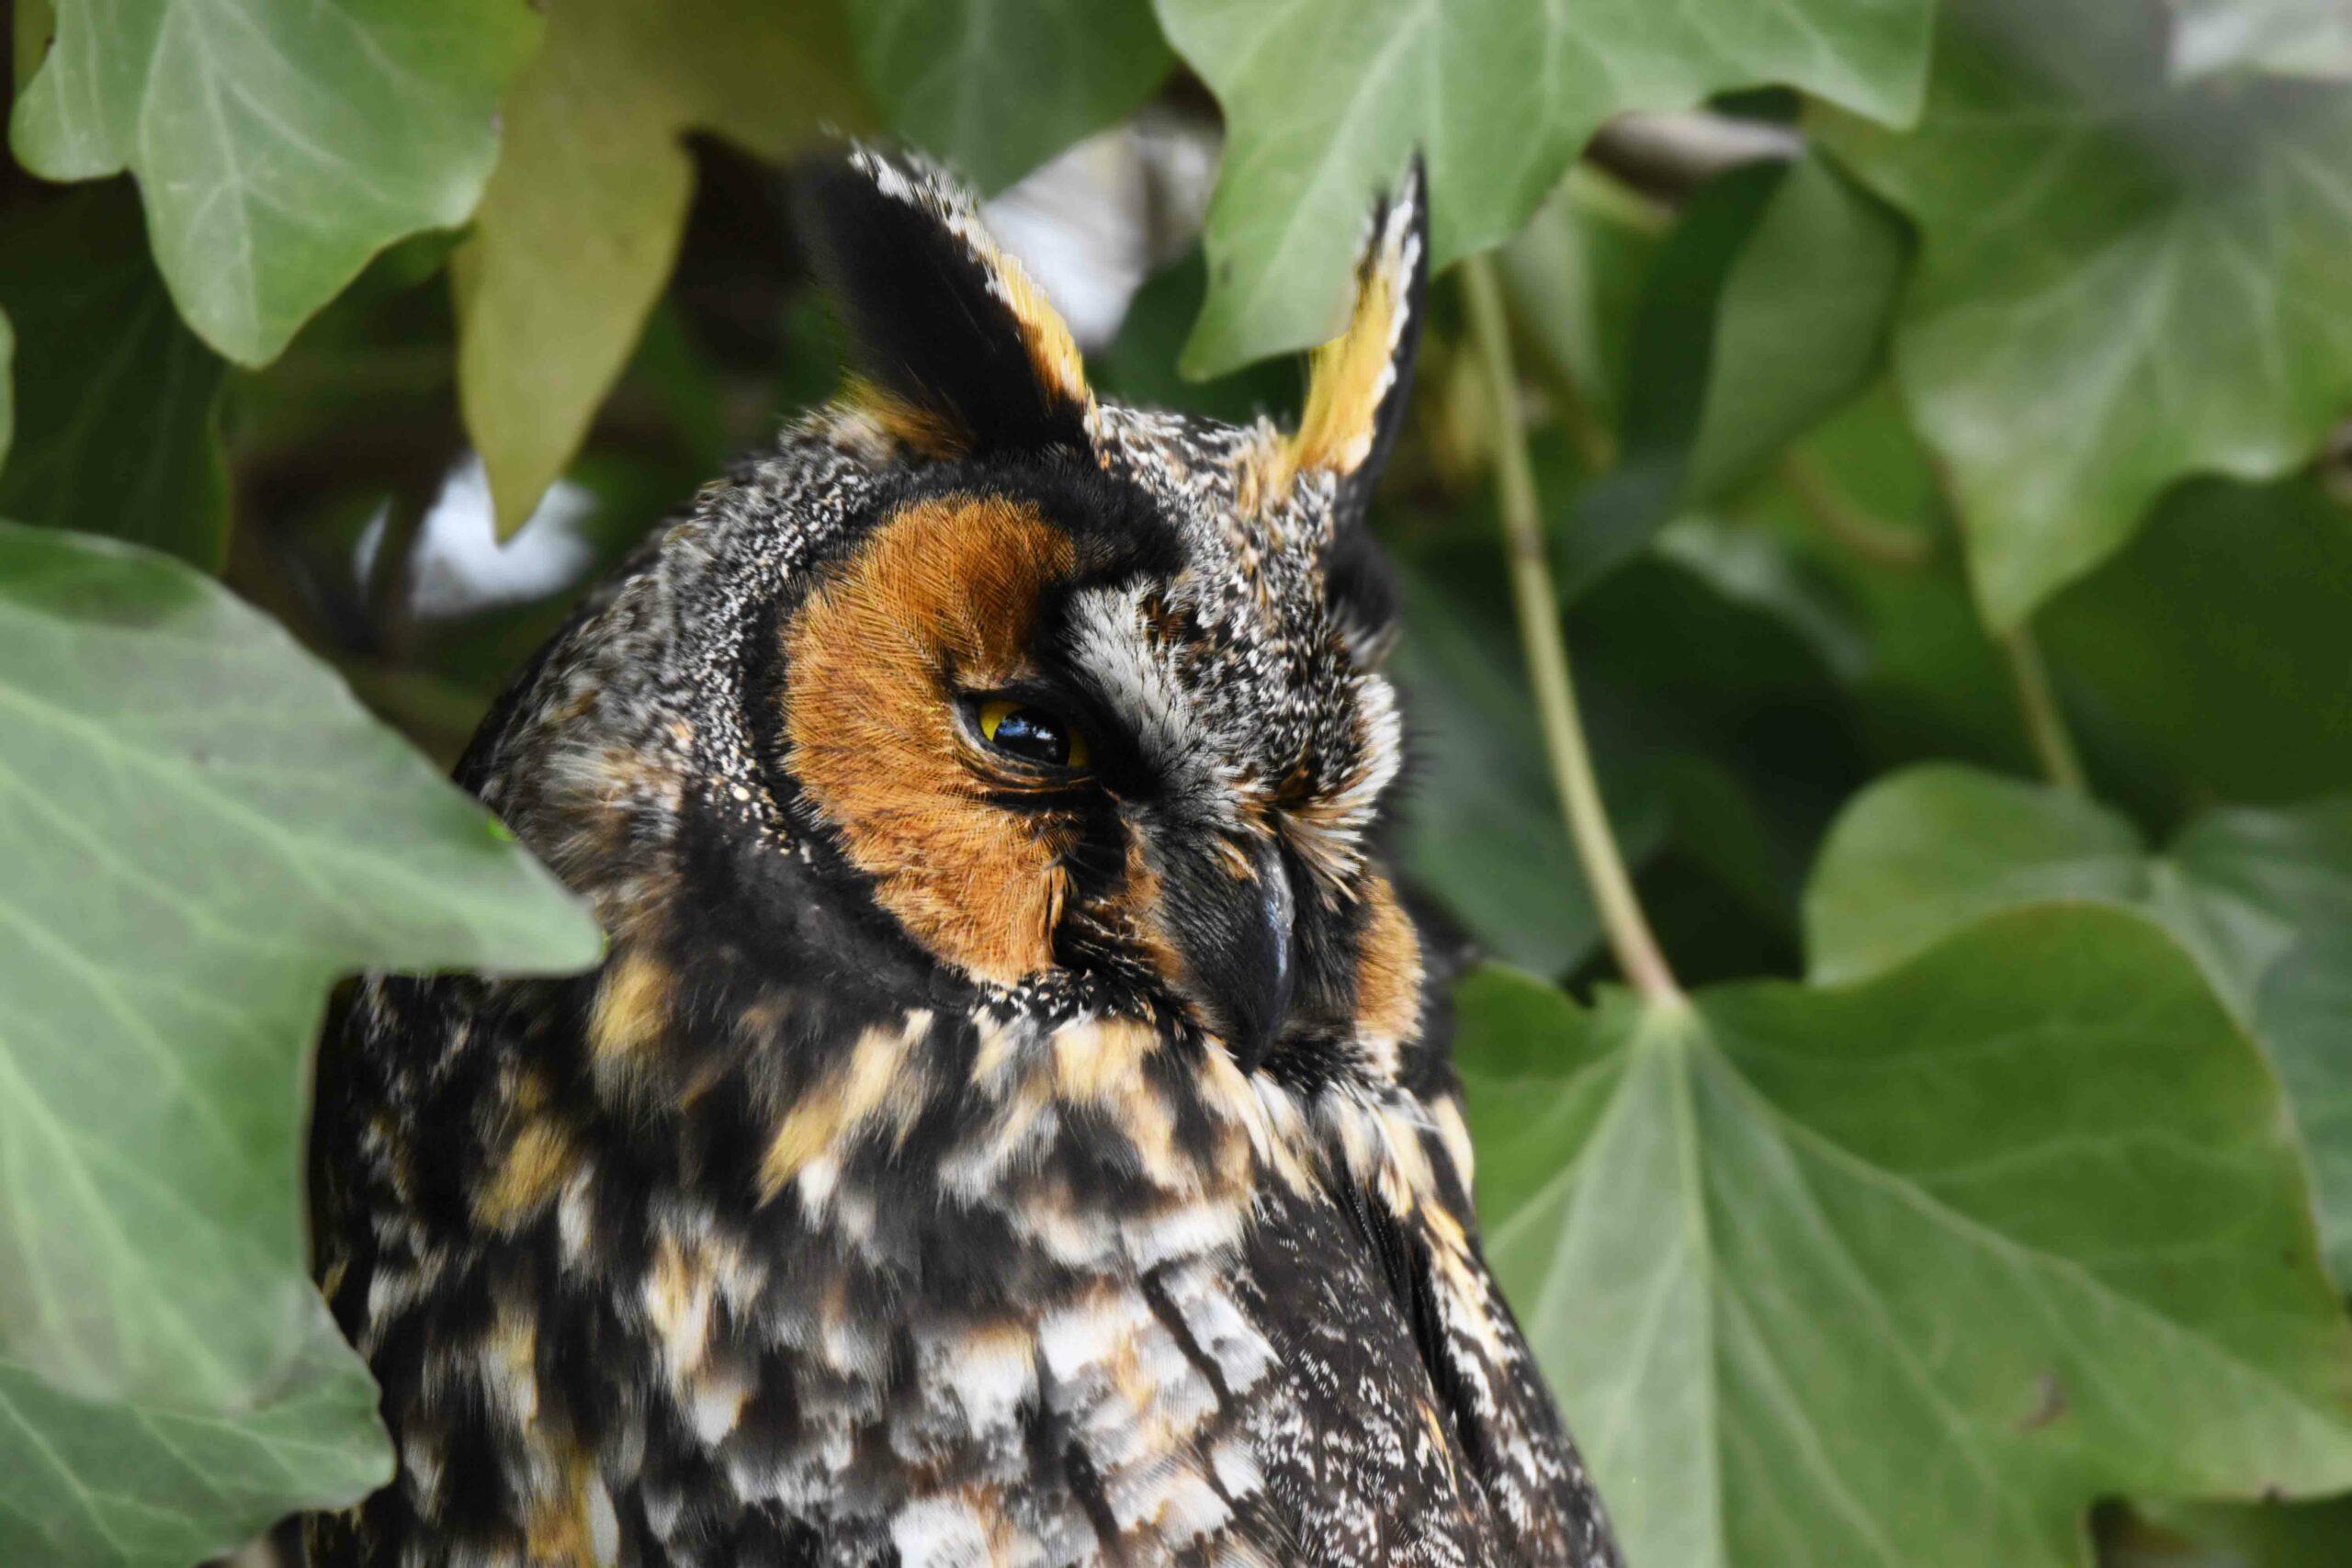 Long Eared owl looking in the distance, profile view